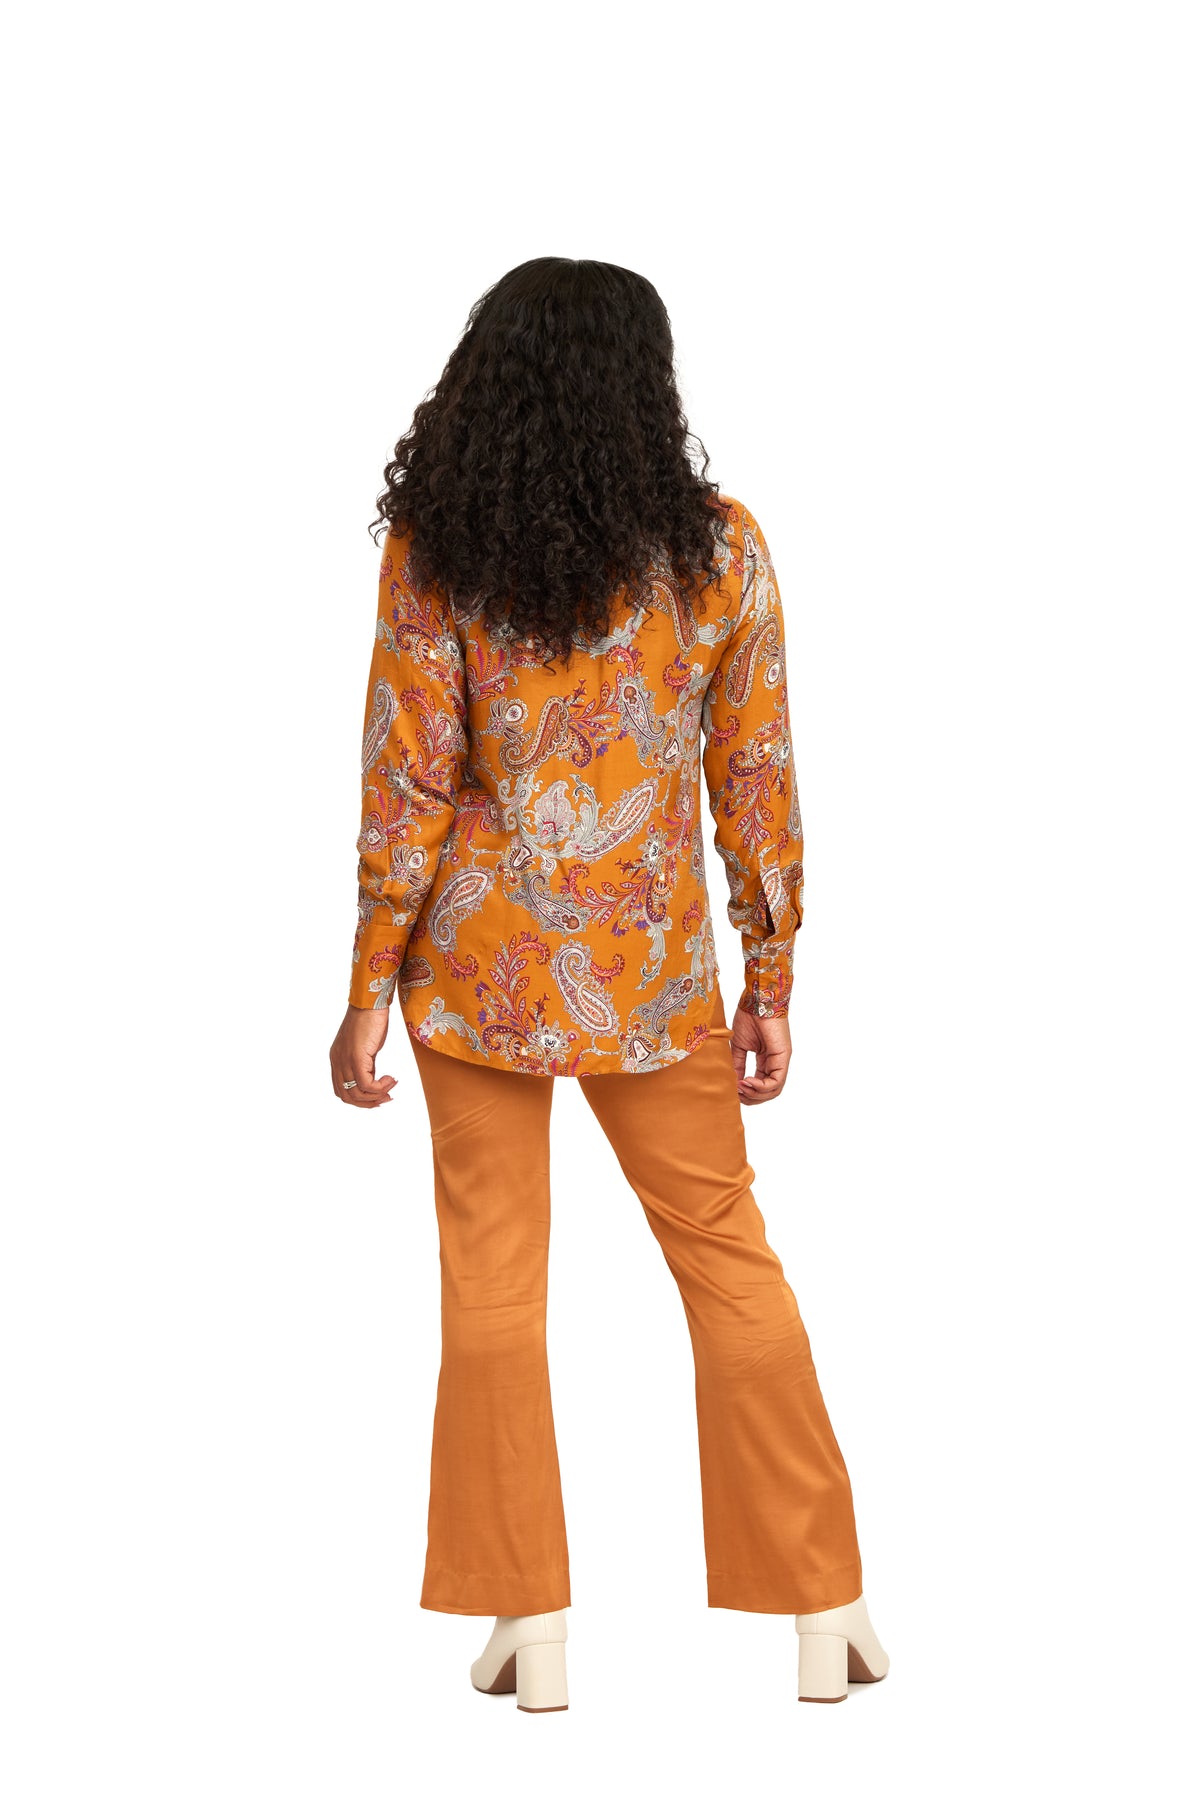 The Claiborne Blouse in Paisley Viscose Silk